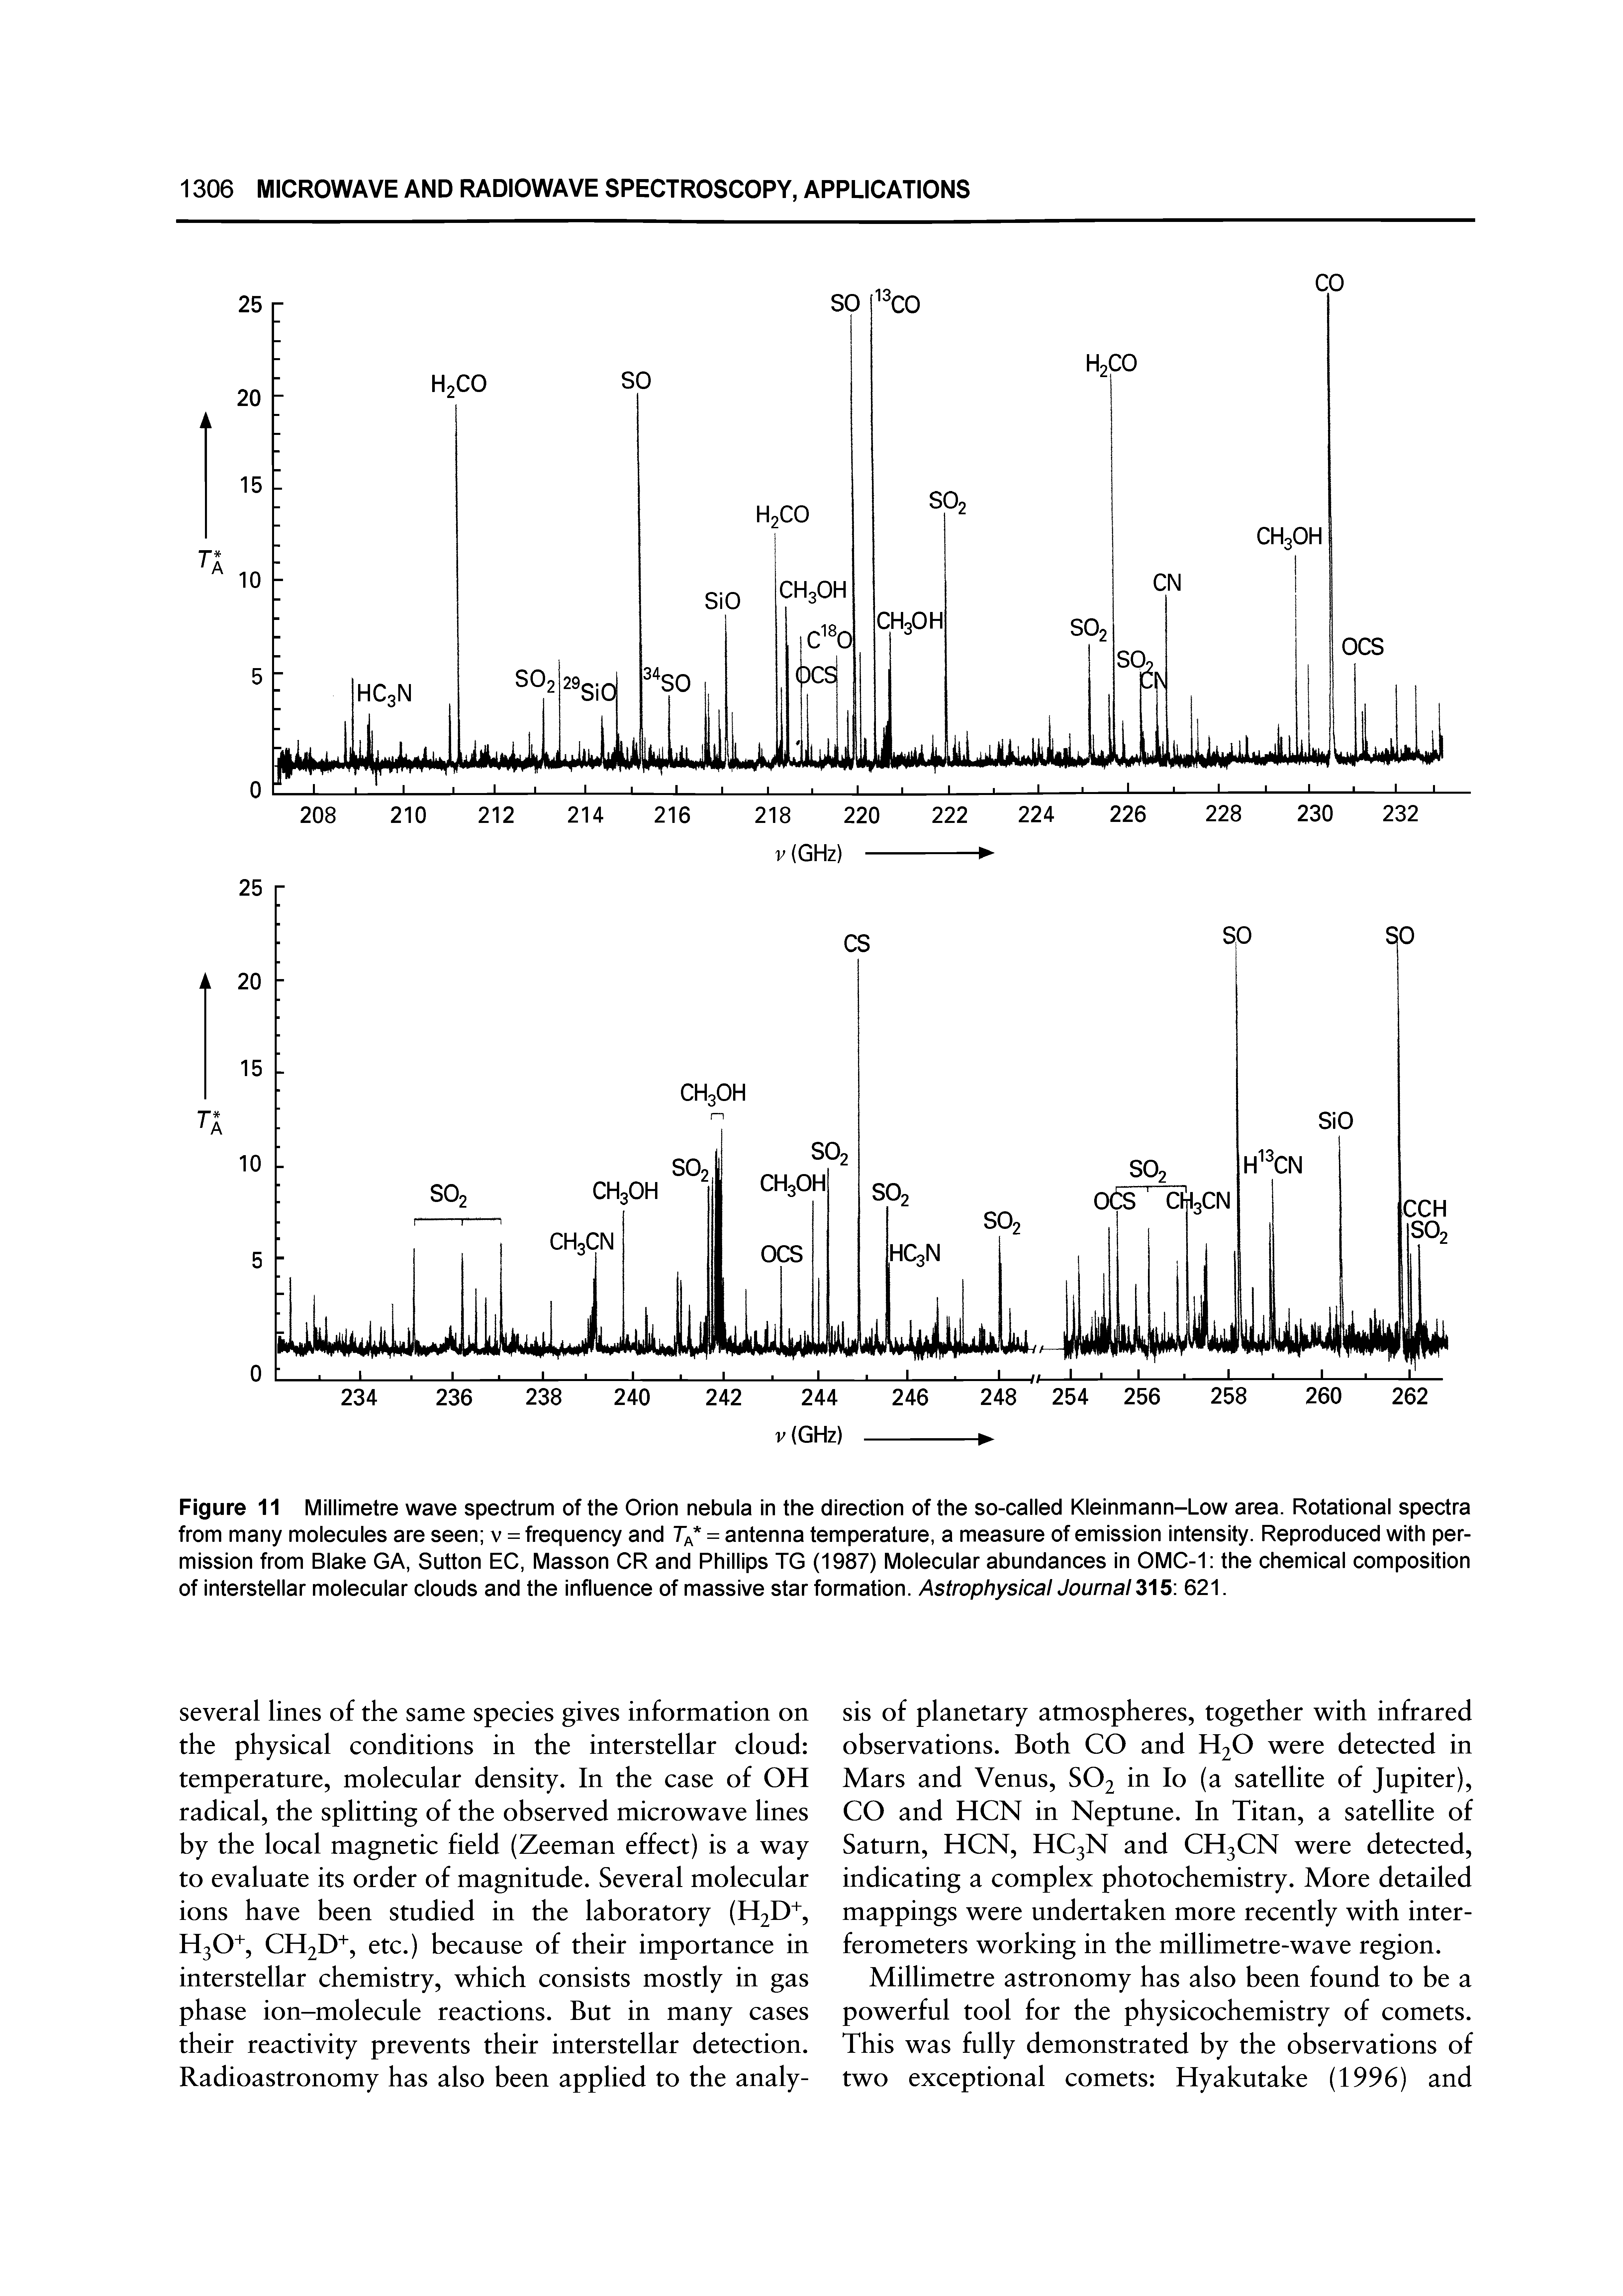 Figure 11 Millimetre wave spectrum of the Orion nebula in the direction of the so-called Kleinmann-Low area. Rotational spectra from many molecules are seen v = frequency and Ta = antenna temperature, a measure of emission intensity. Reproduced with permission from Blake GA, Sutton EC, Masson OR and Phillips TG (1987) Molecular abundances in OMC-1 the chemical composition of interstellar molecular clouds and the influence of massive star formation. Astrophysical Journal3 5 621.